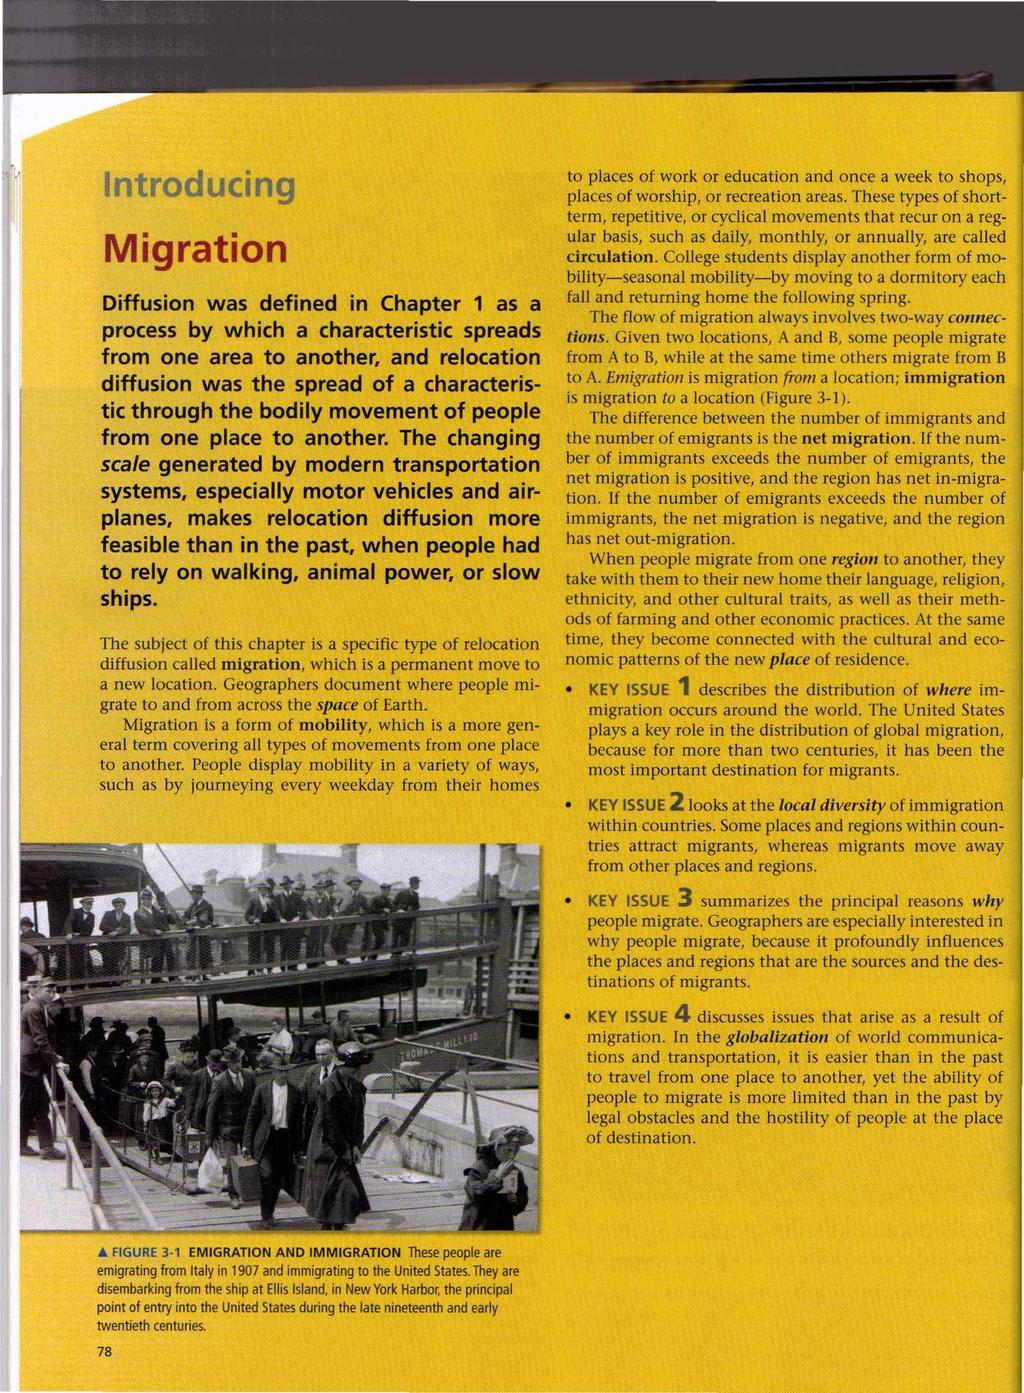 Introducing Migration Diffusion was defined in Chapter 1 as a process by which a characteristic spreads from one area to another, and relocation diffusion was the spread of a characteristic through